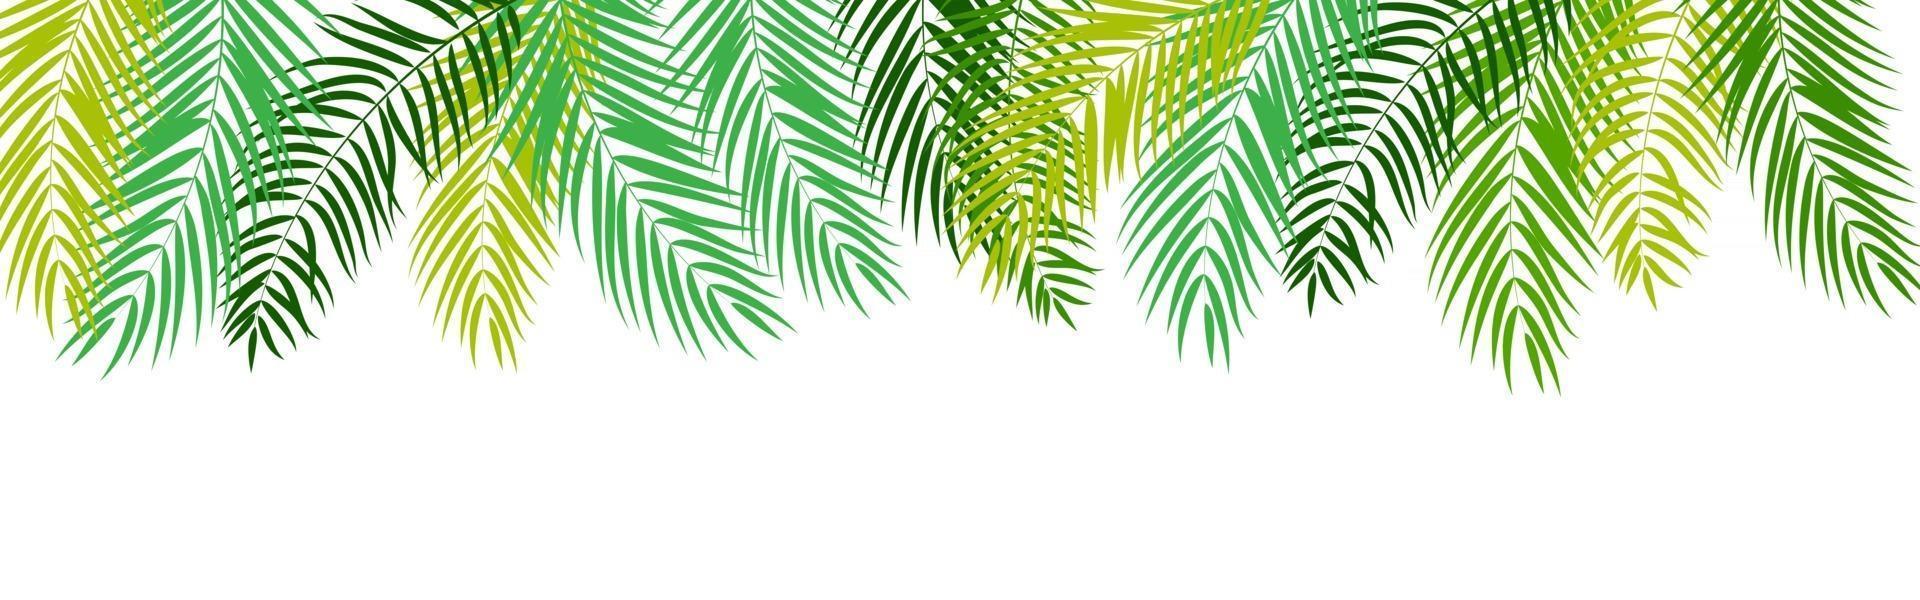 Beautifil Palm Tree Leaf  Silhouette Background Vector Illustration